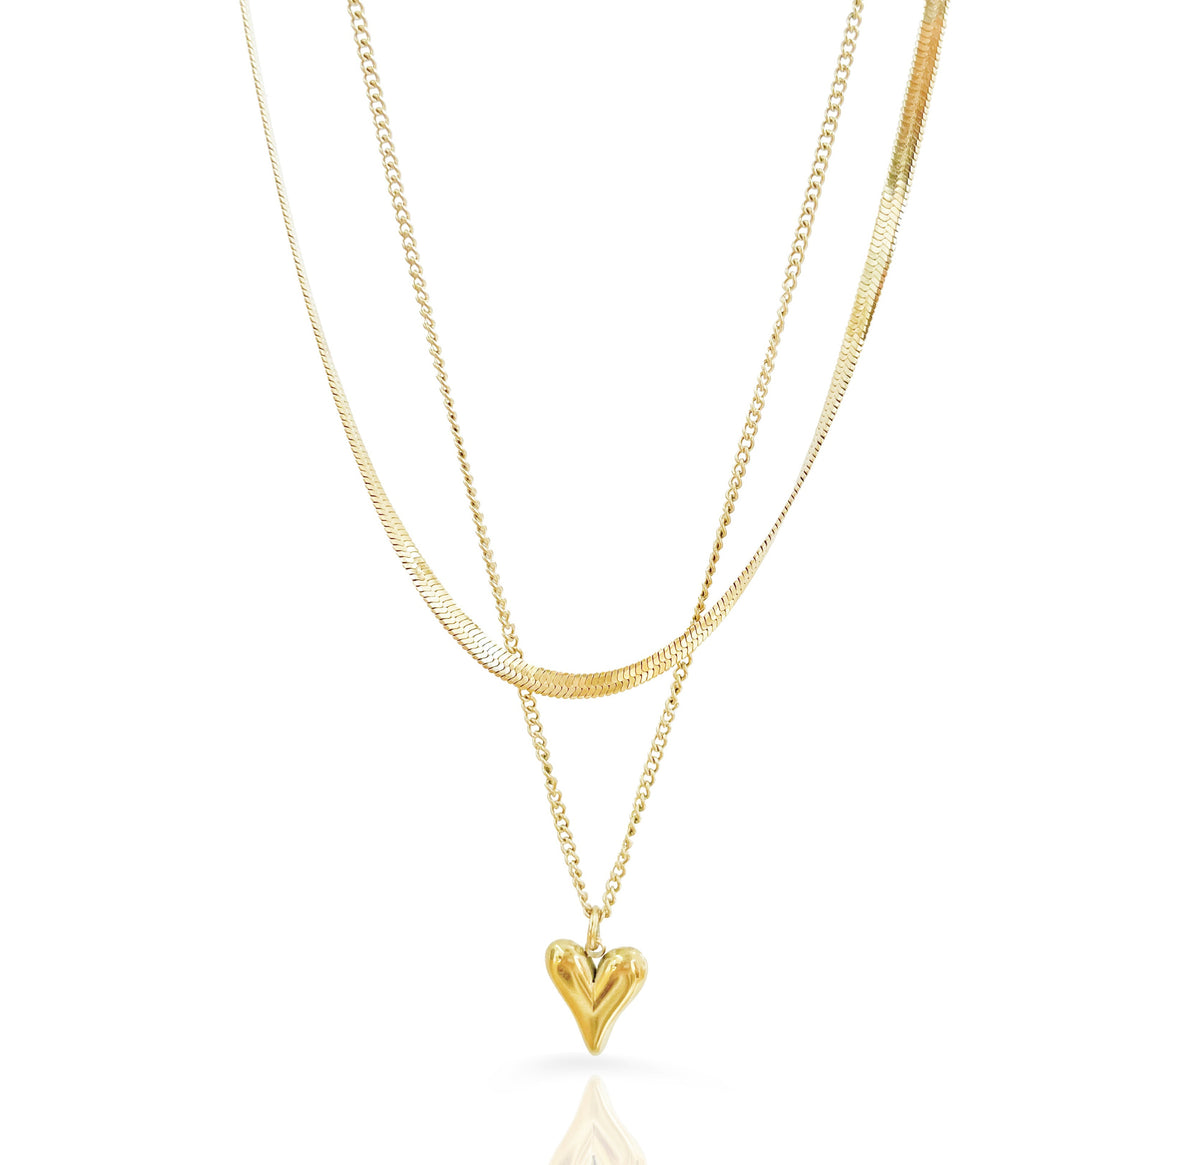 gold heart pendant stack necklace waterproof jewelry